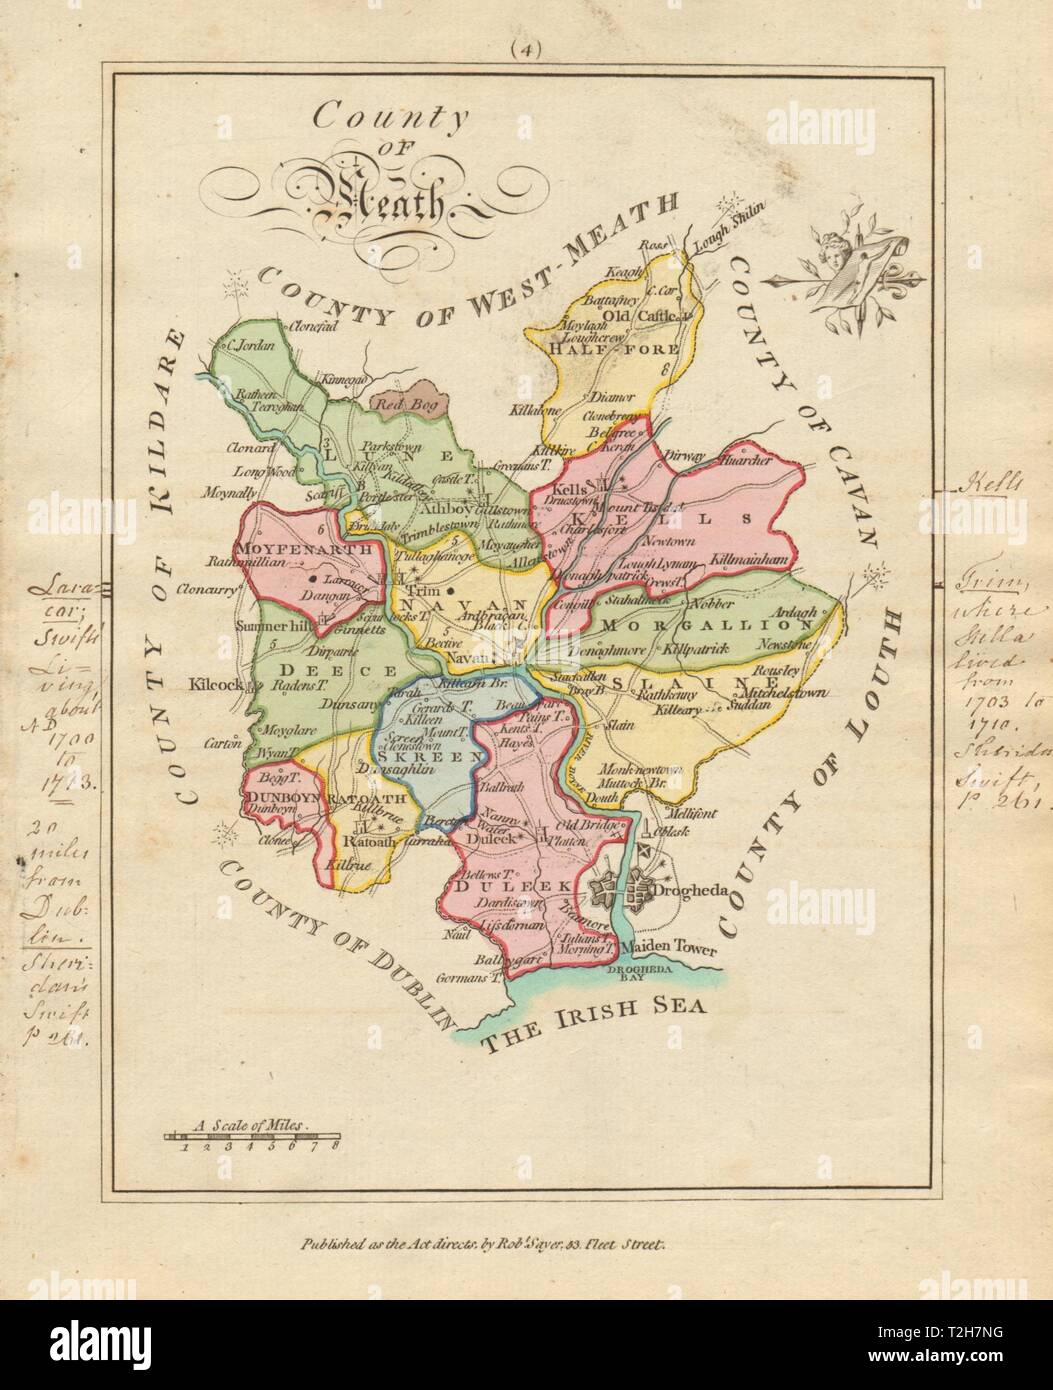 County of Meath, Leinster. Antique copperplate map by Scalé / Sayer 1788 Stock Photo